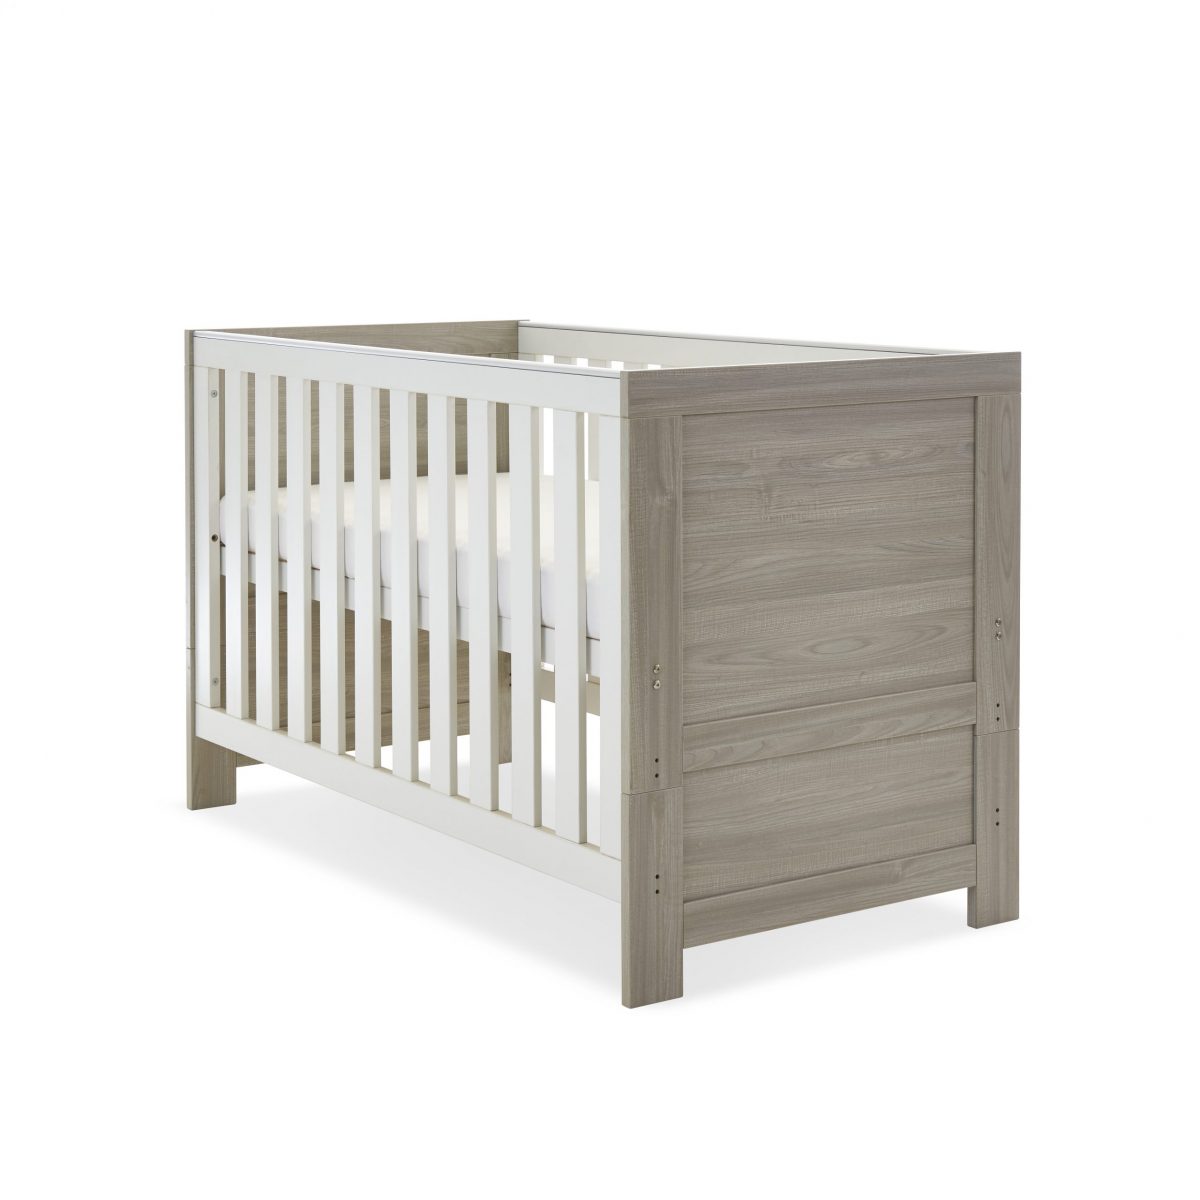 Obaby Nika Cot Bed-Grey Wash and White